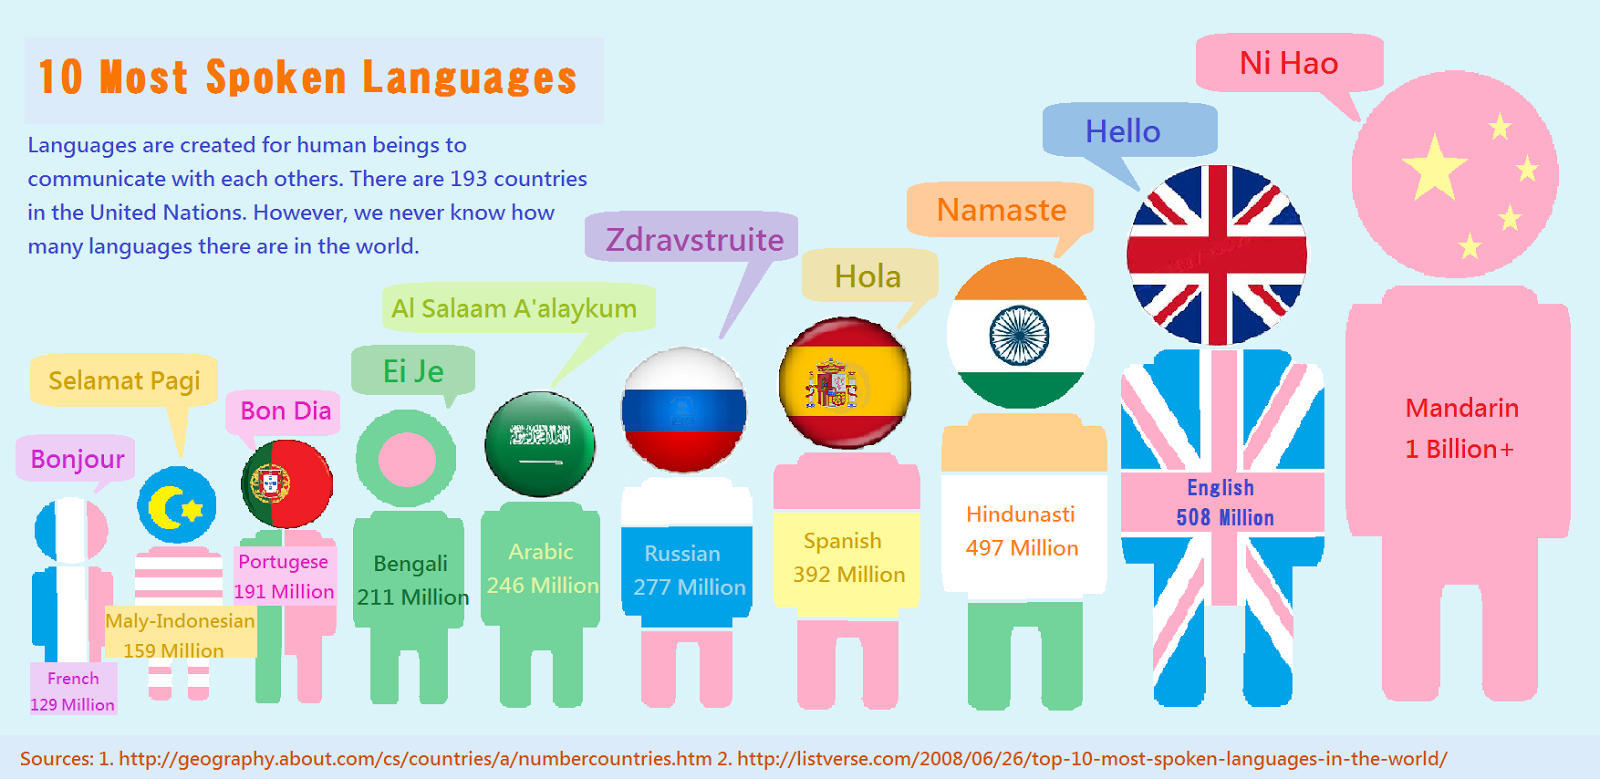 How many languages are there in the world? |﻿ Language Learning